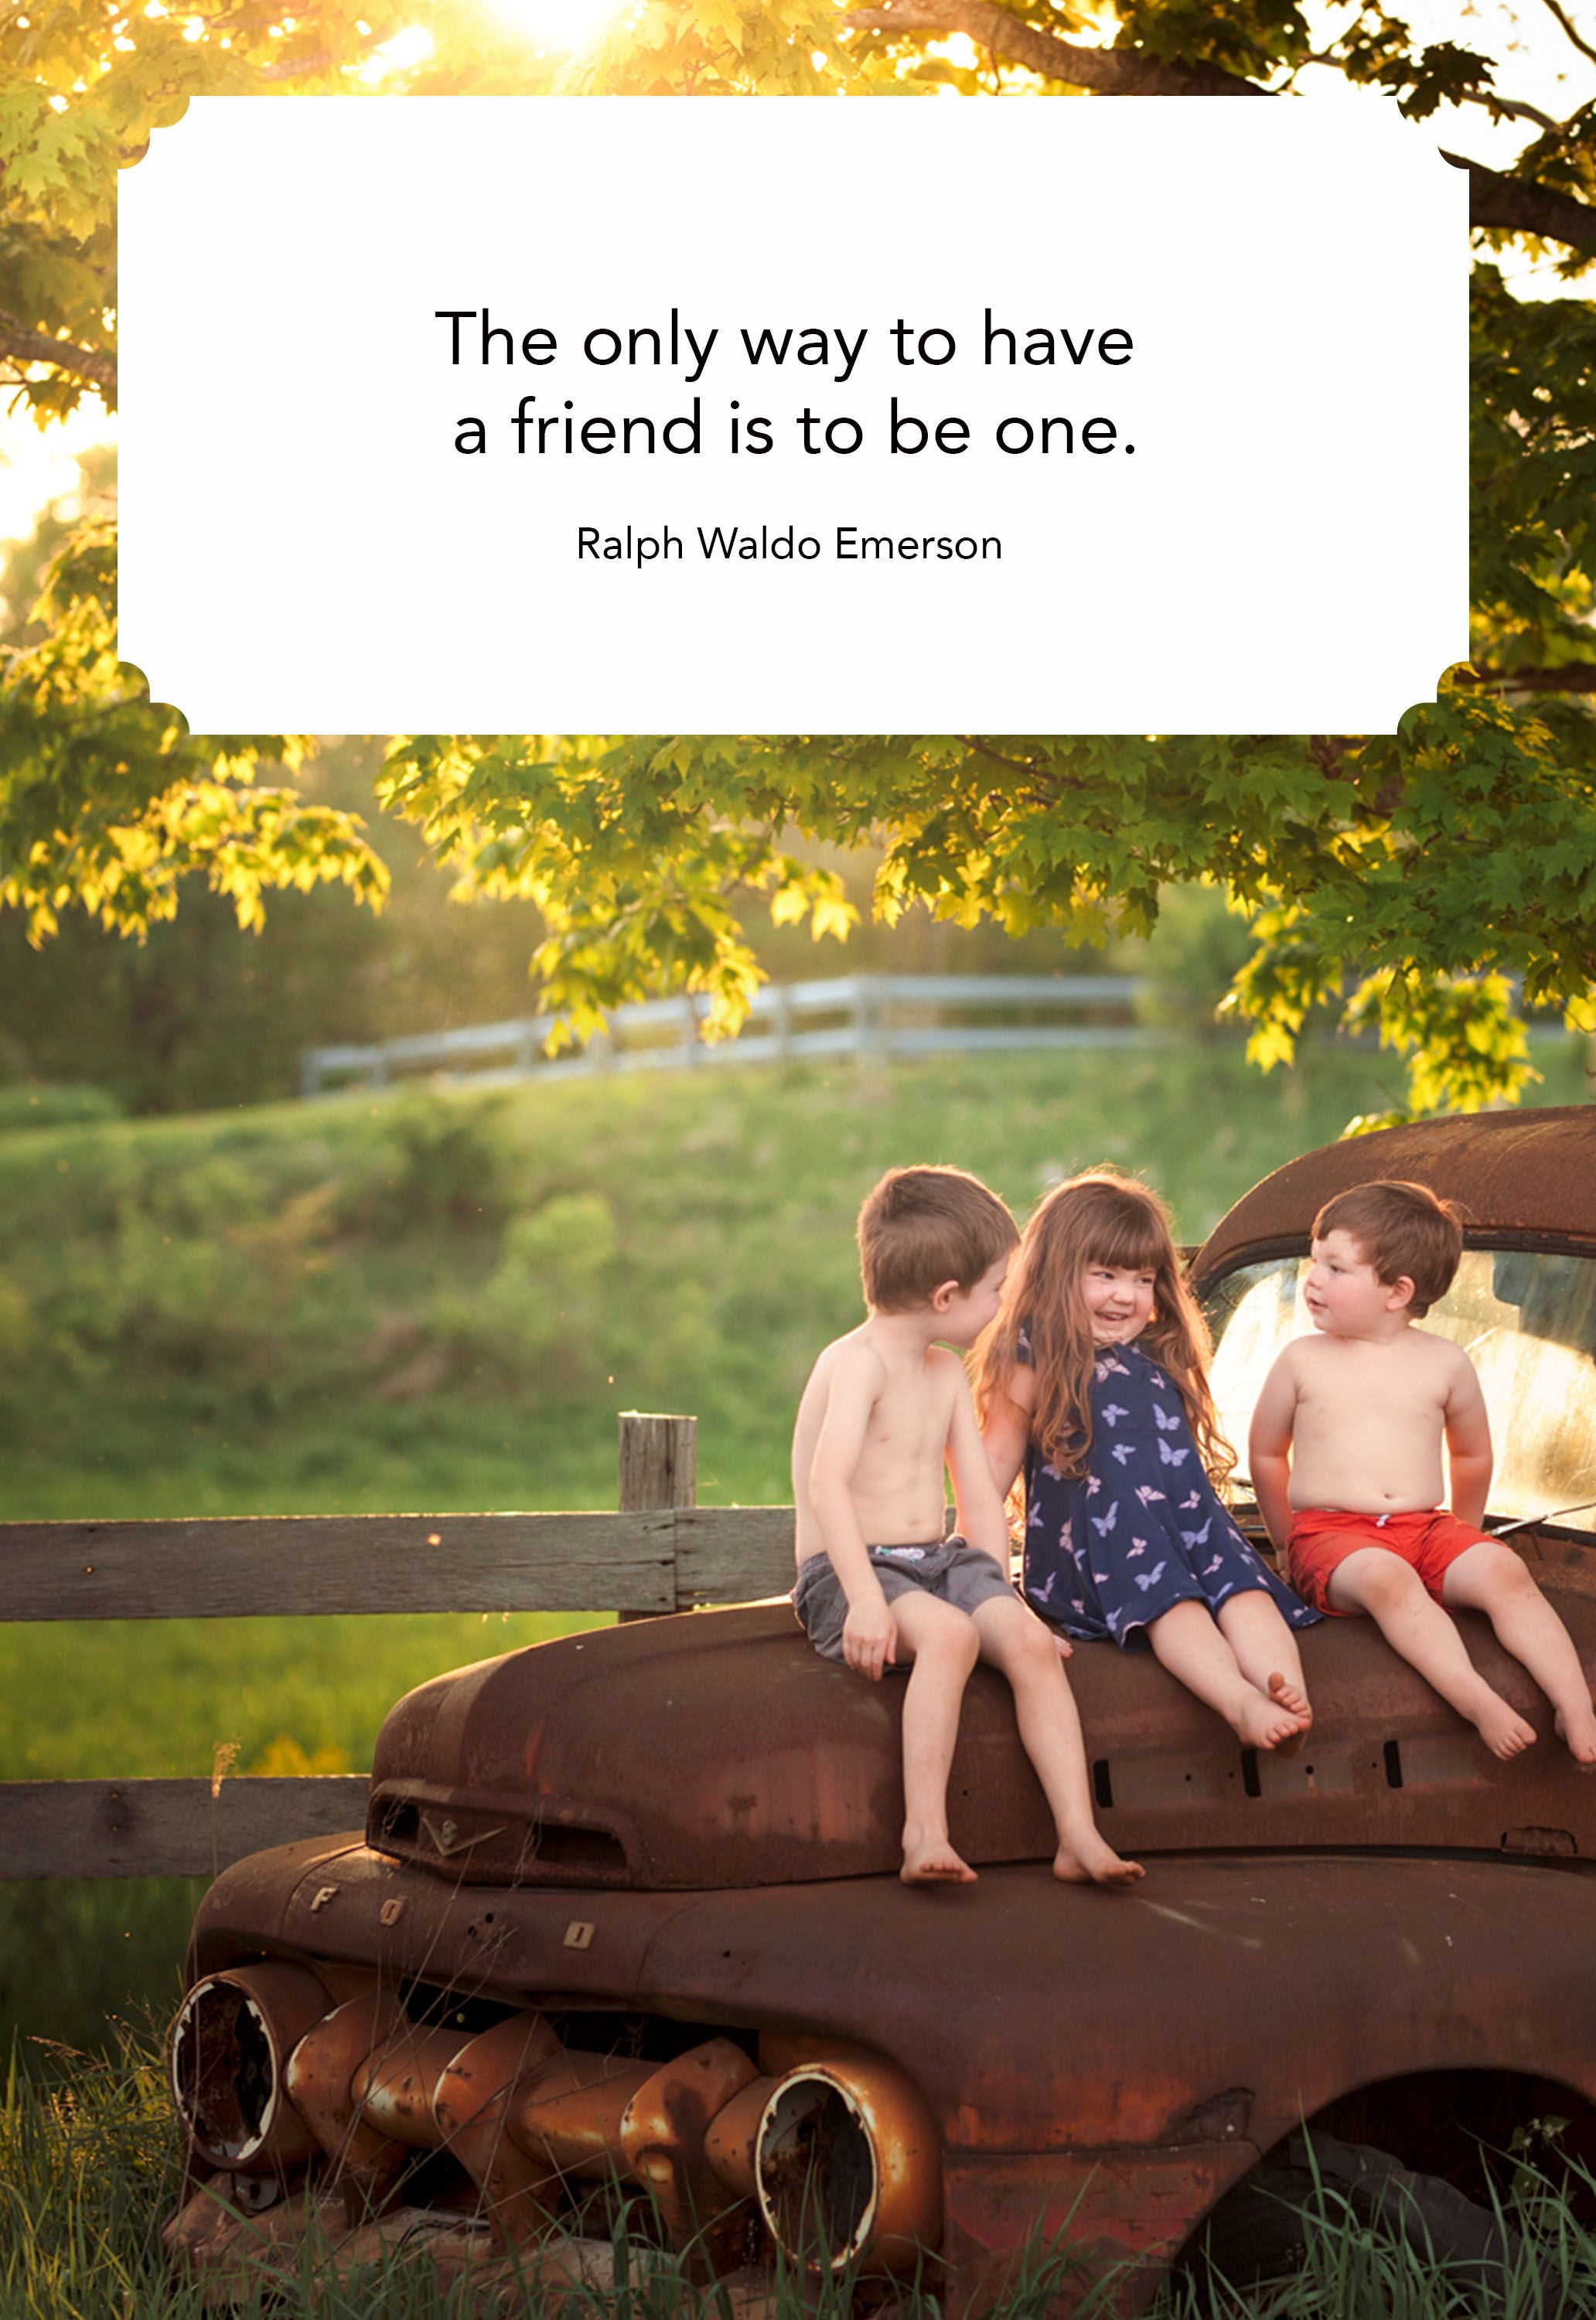 the only way to have a friend is to be one. ralph waldo emerson